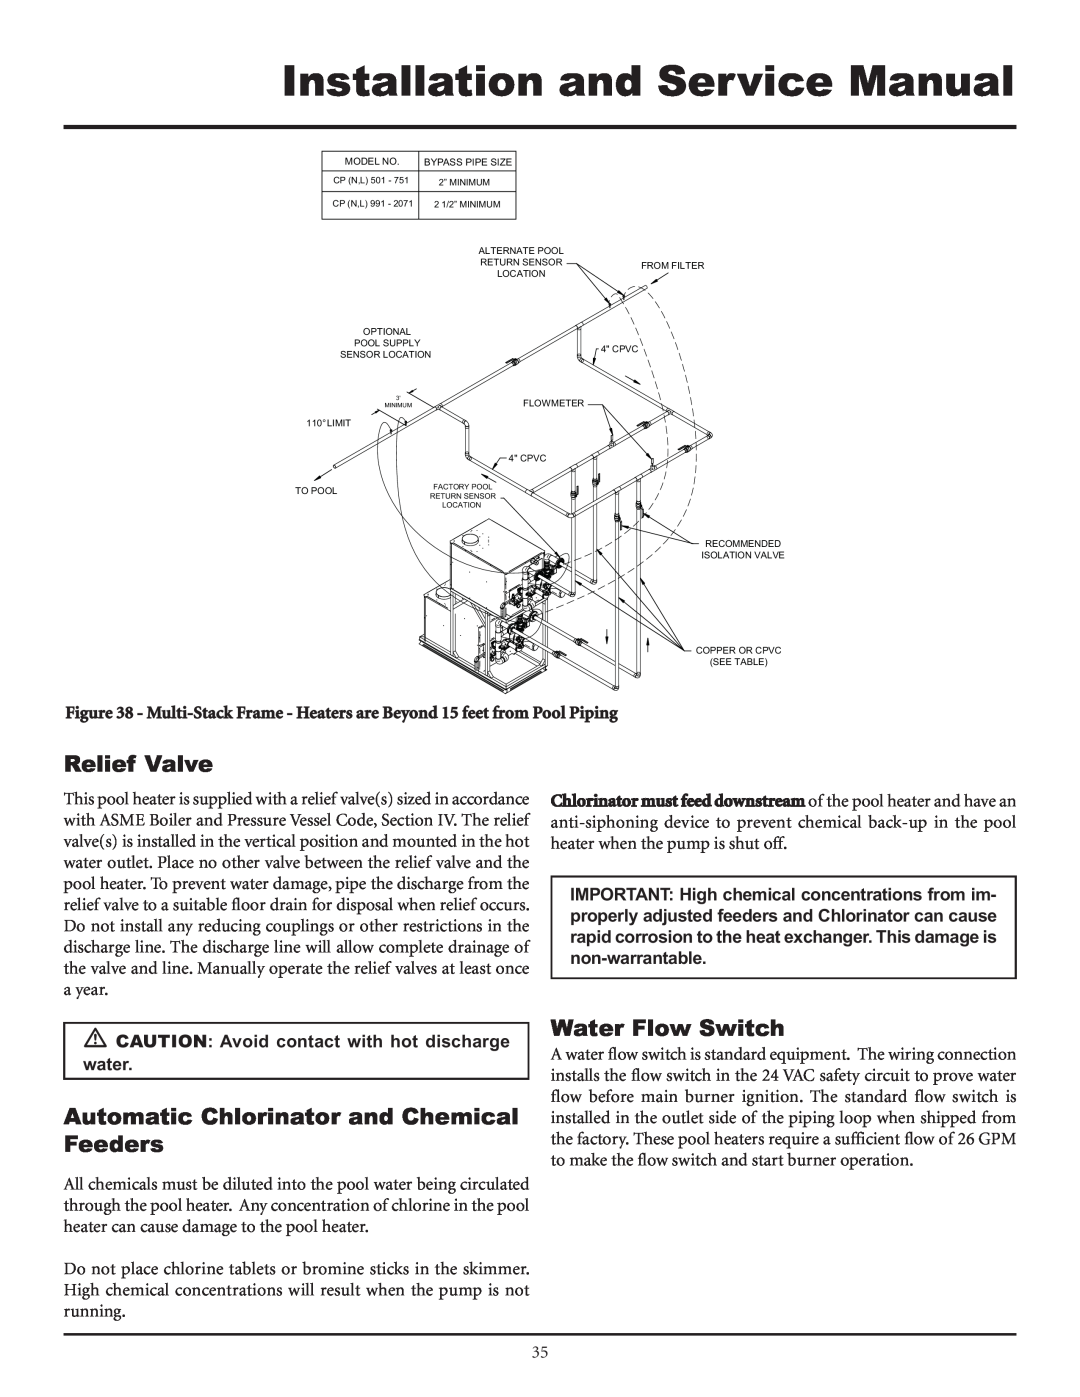 Lochinvar F0600187510 service manual Relief Valve, Automatic Chlorinator and Chemical Feeders, Water Flow Switch 